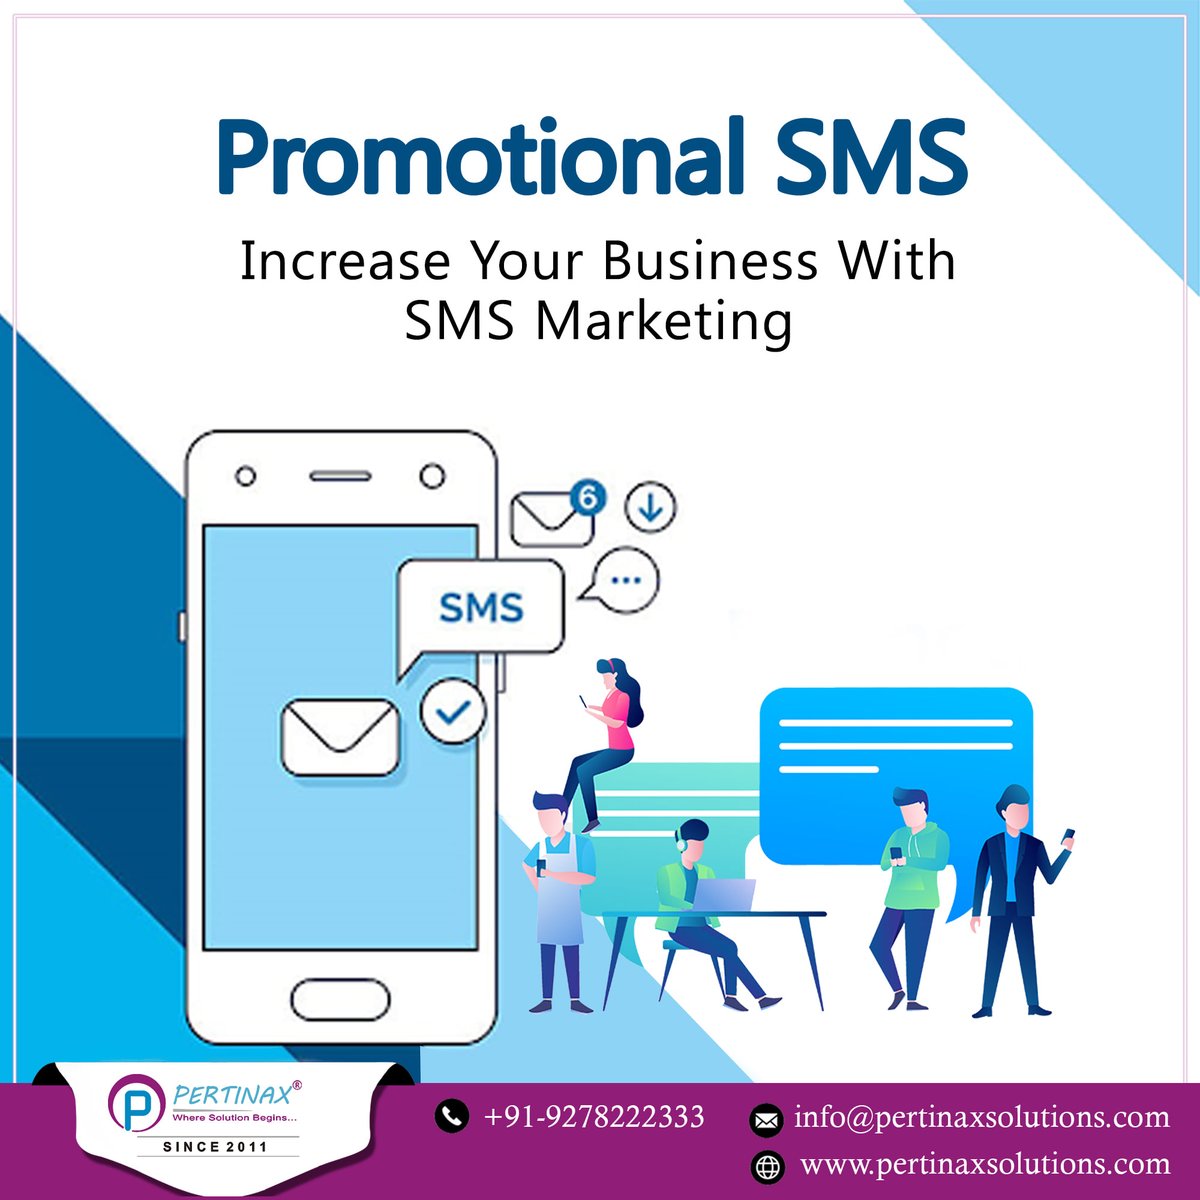 📷Promotional SMS
Increase Your Business With SMS Marketing

Call: 9278222333
📷 pertinaxsolutions.com

#SMS #bulksms #Bulksmsmarketing #smsmarketing #smservices #transactionalsms #digitalpromotions #digitalmarketing #leadgeneration #brandpromotion #DigitalIndia #gurgaon #delhi